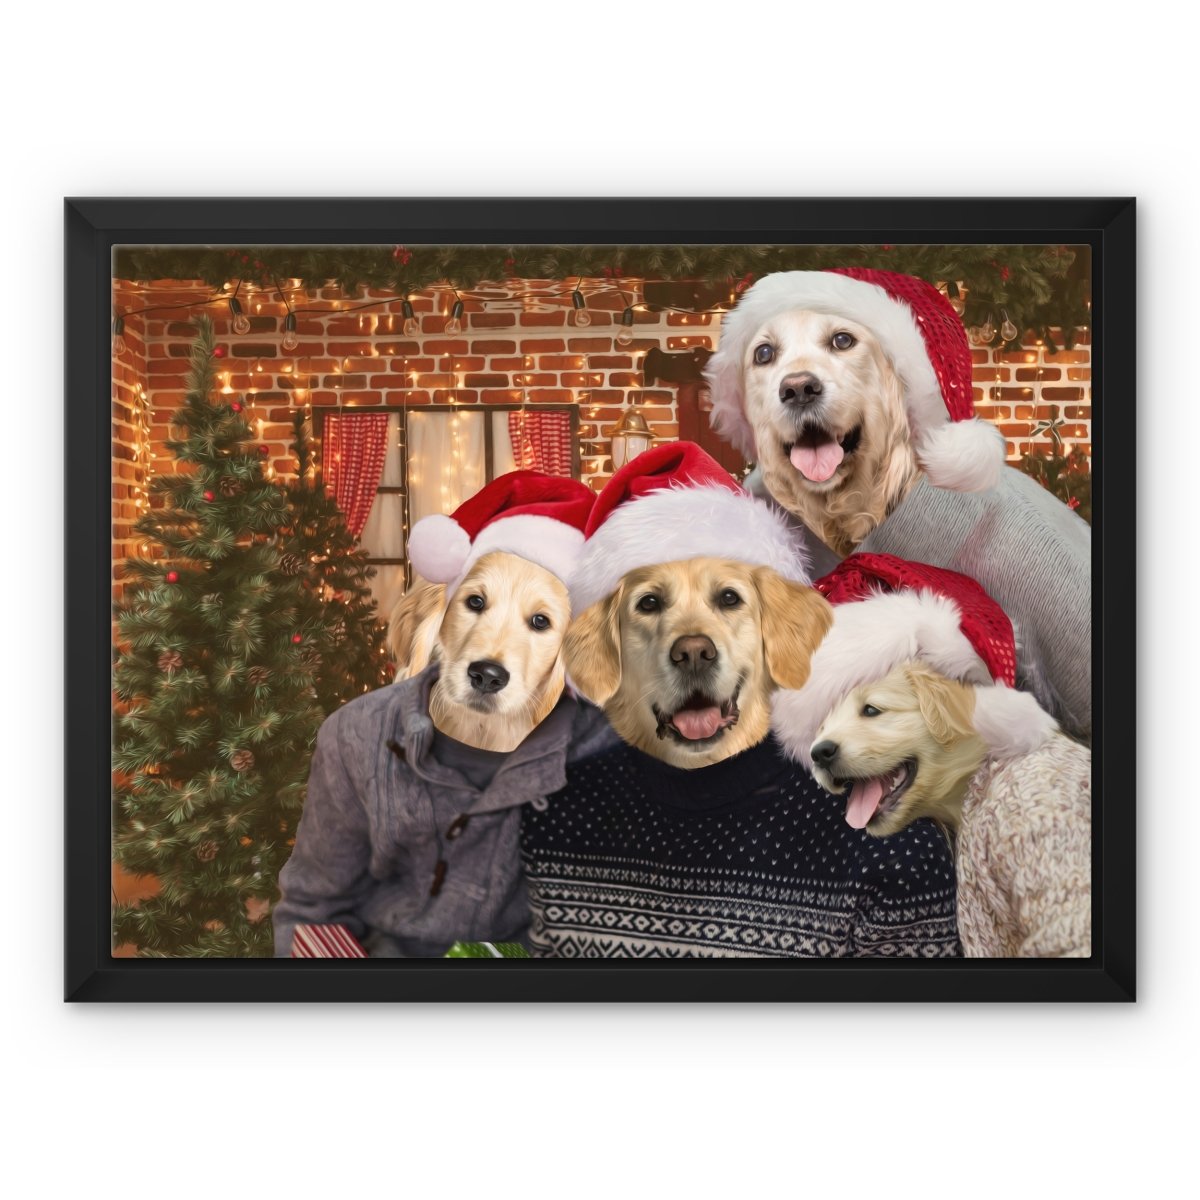 The Christmas Family: Custom Pet Canvas - Paw & Glory - #pet portraits# - #dog portraits# - #pet portraits uk#paw and glory, pet portraits canvas,pet on canvas uk, pet photo to canvas, dog photo on canvas, dog canvas, pet on canvas